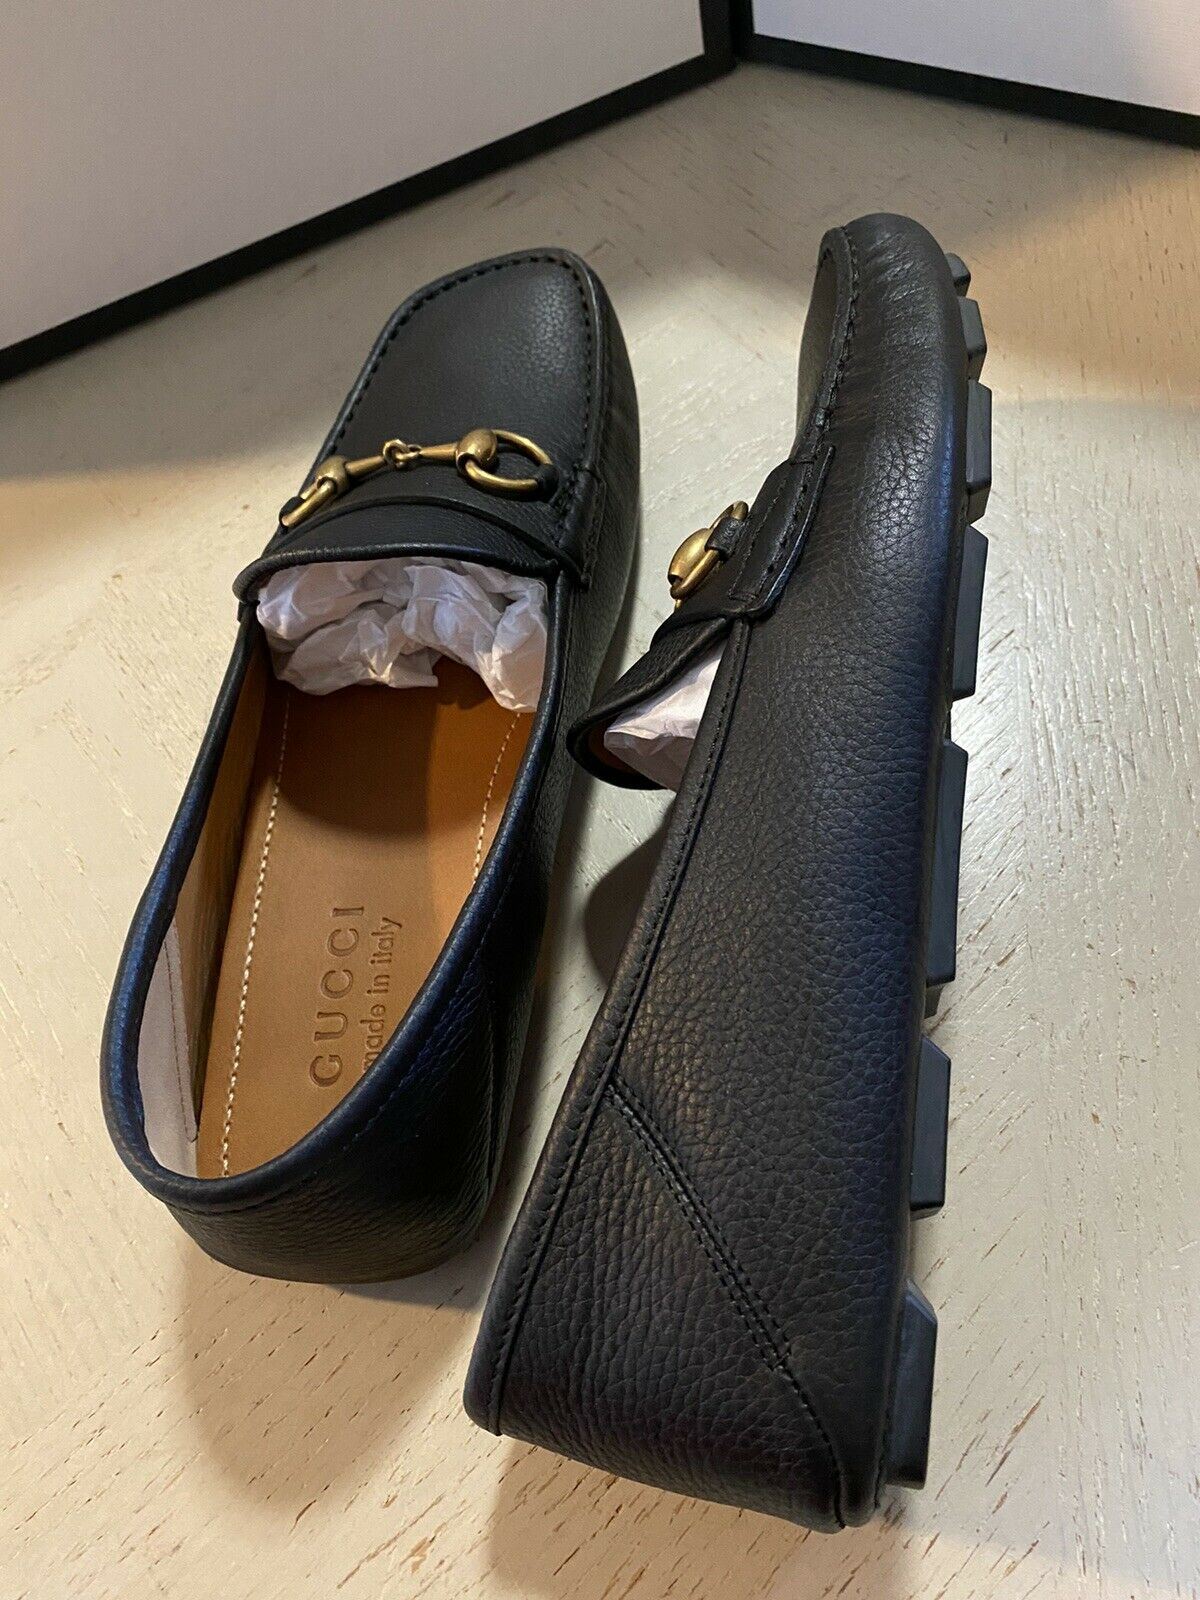 New Gucci Men Leather Driver Loafers Shoes Black 7.5 US/6.5 UK  Italy